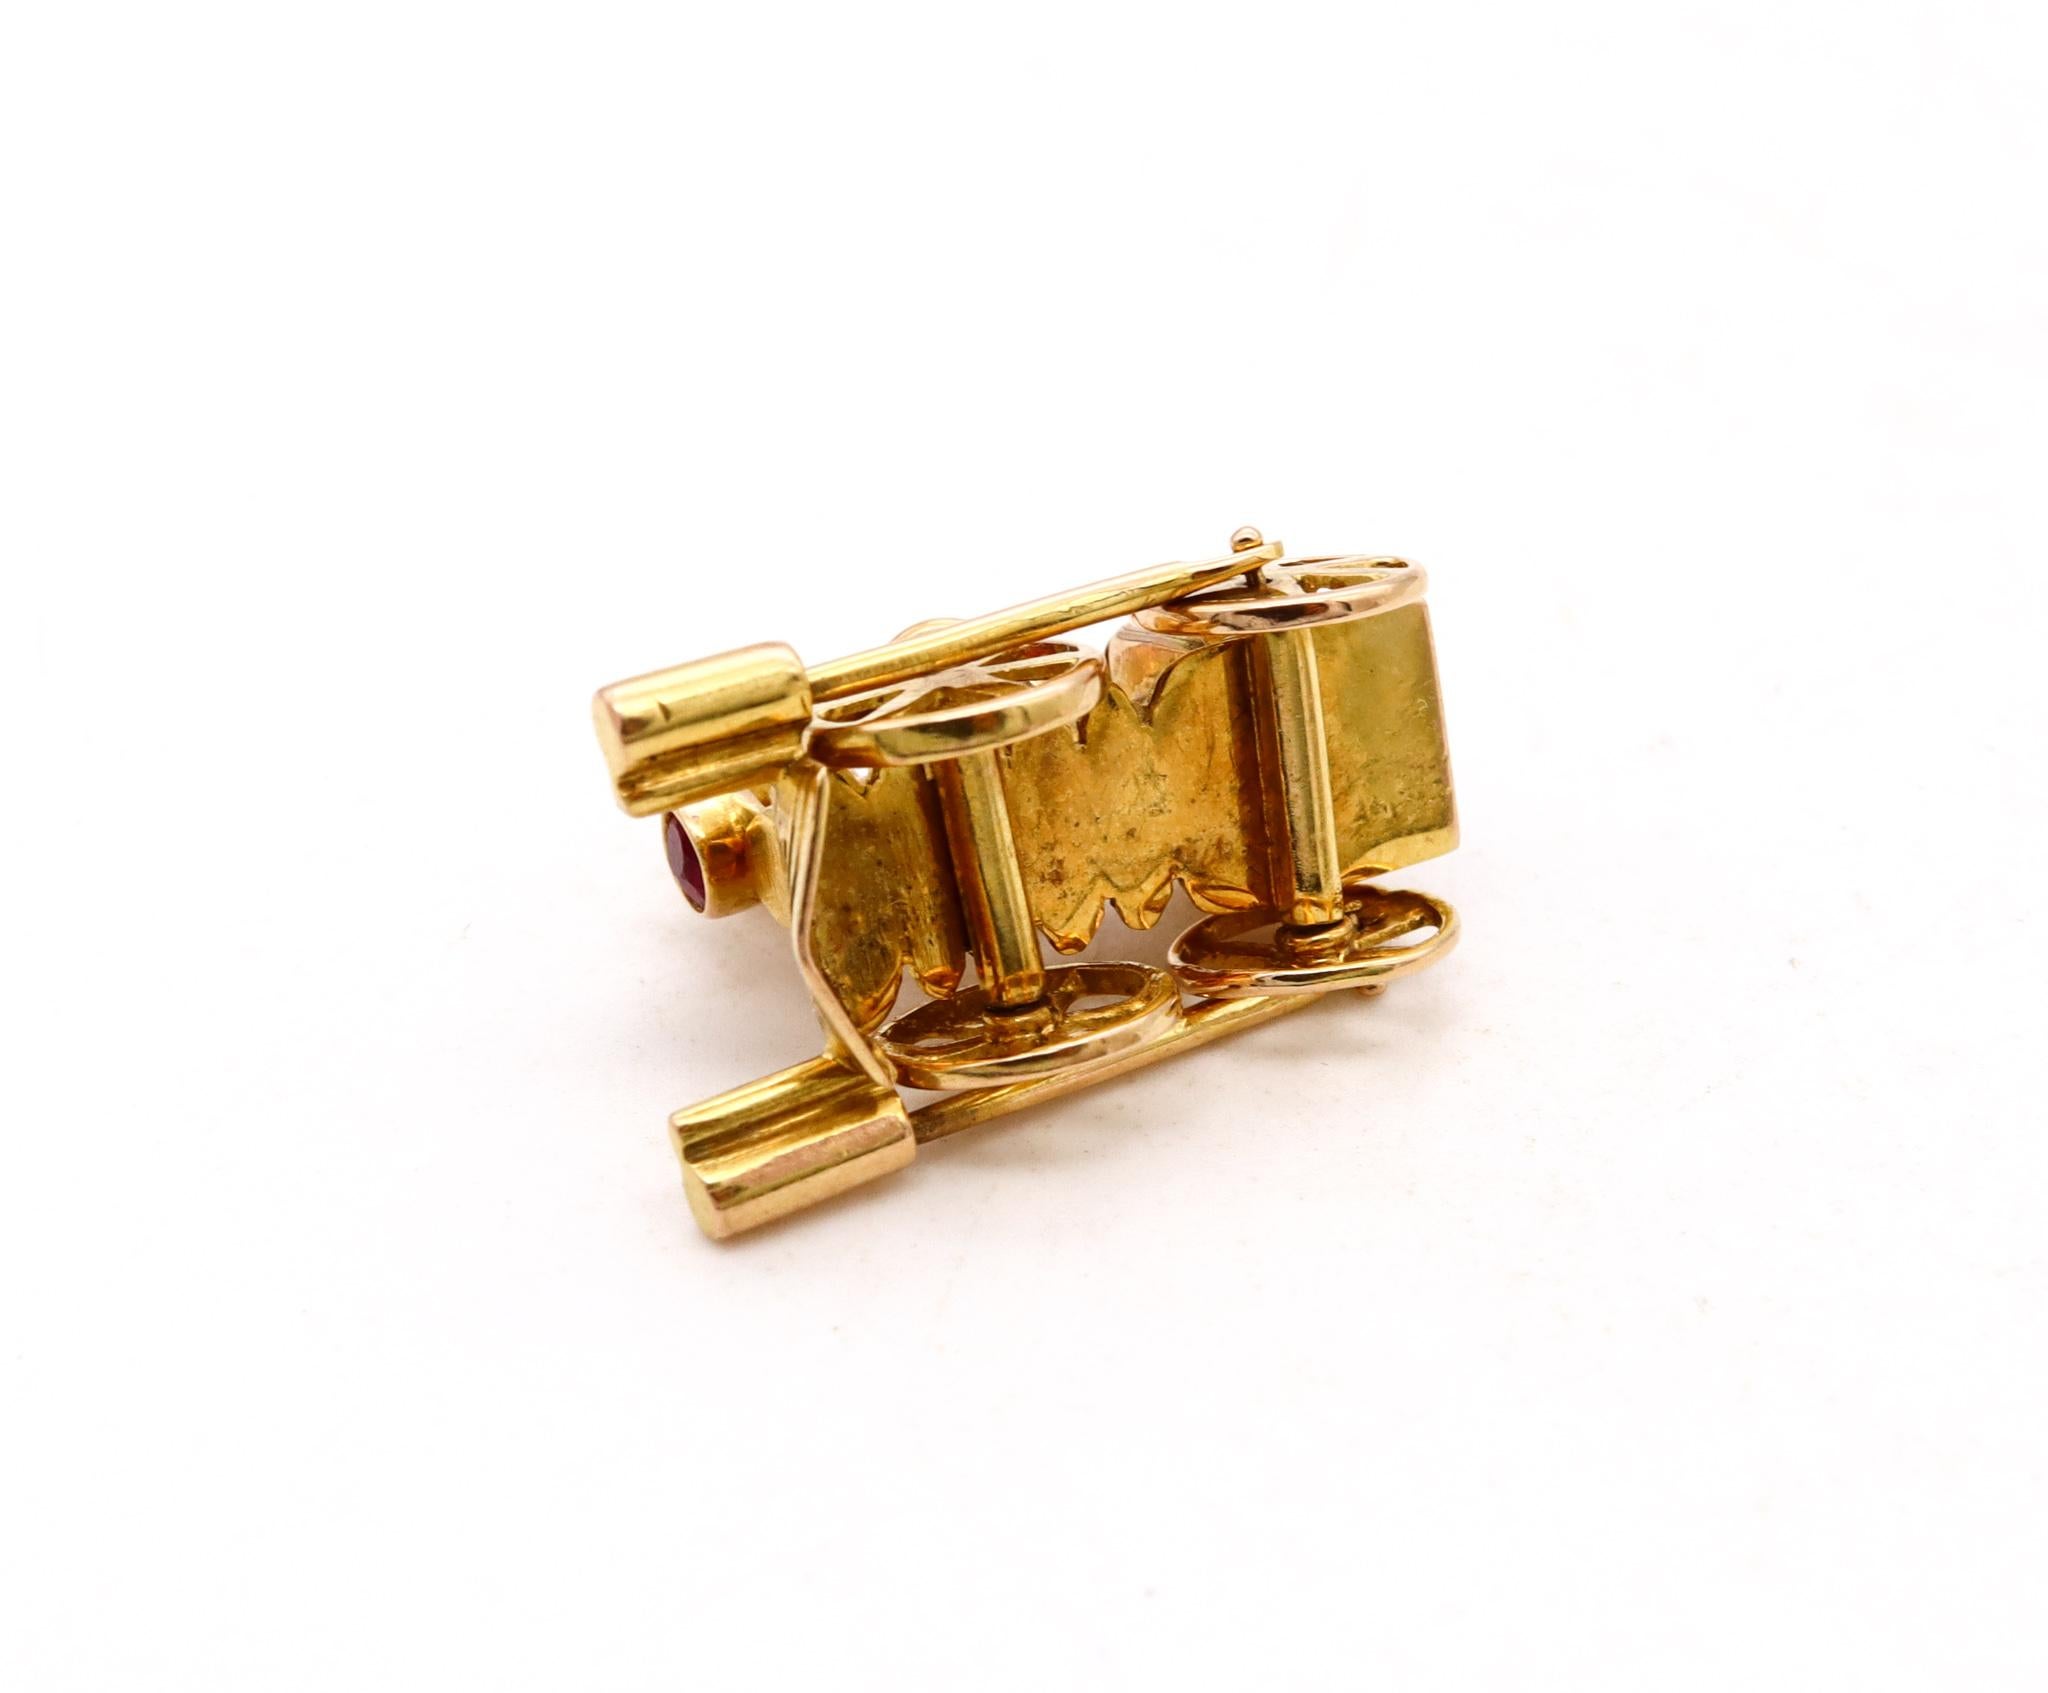 Retro Locomotive Train Charm with Movable Mechanical Parts in Solid 18kt Gold and Ruby For Sale